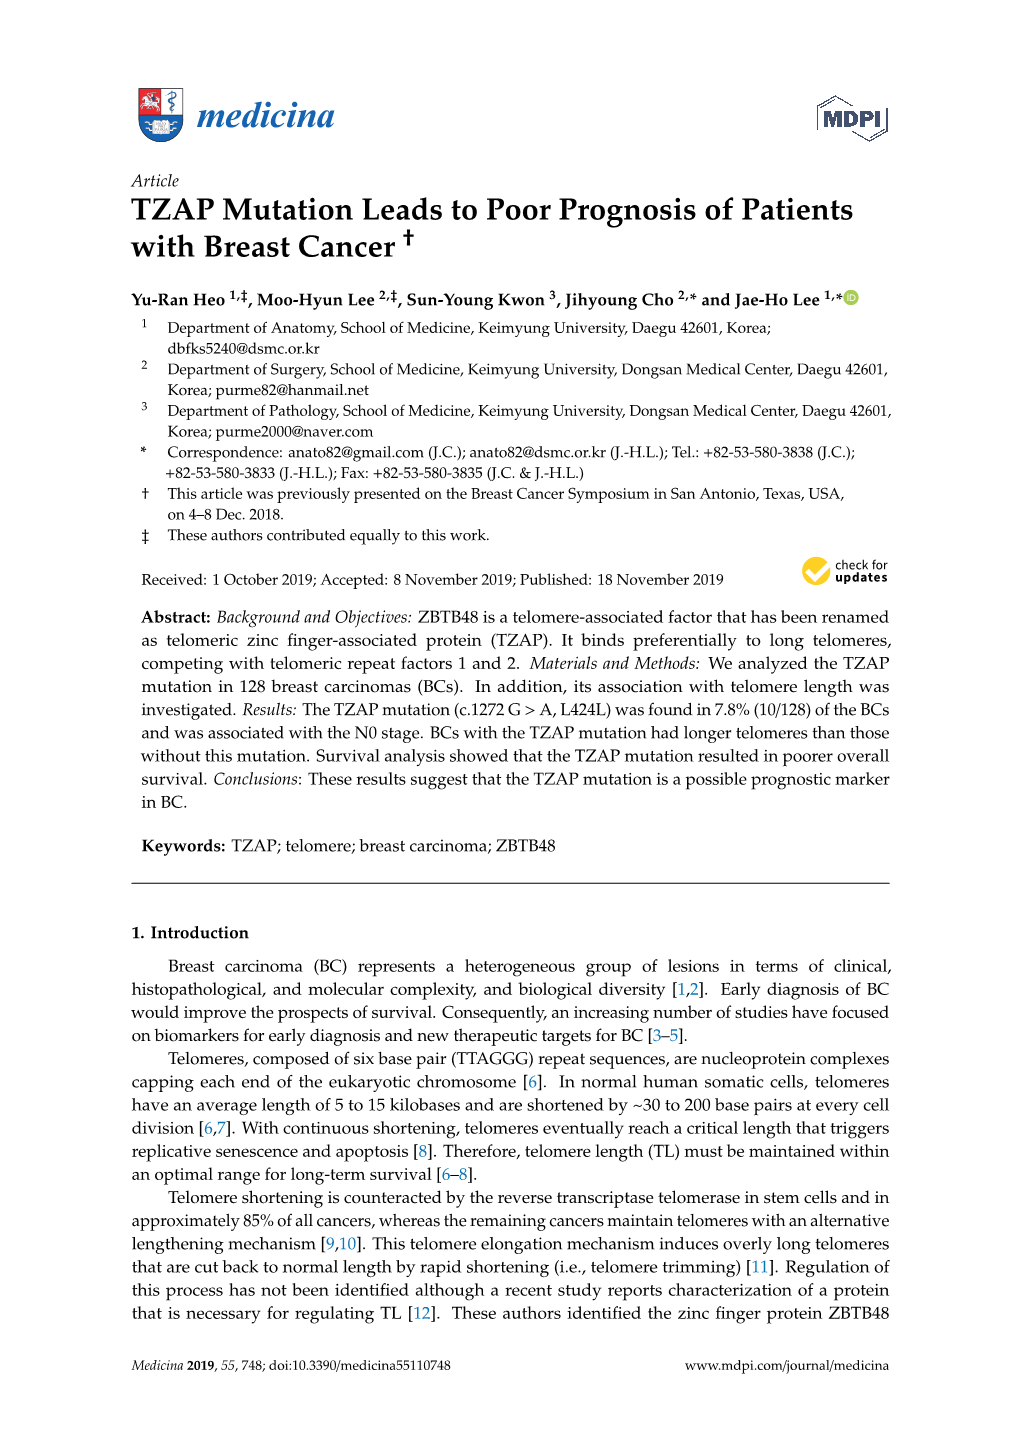 TZAP Mutation Leads to Poor Prognosis of Patients † with Breast Cancer